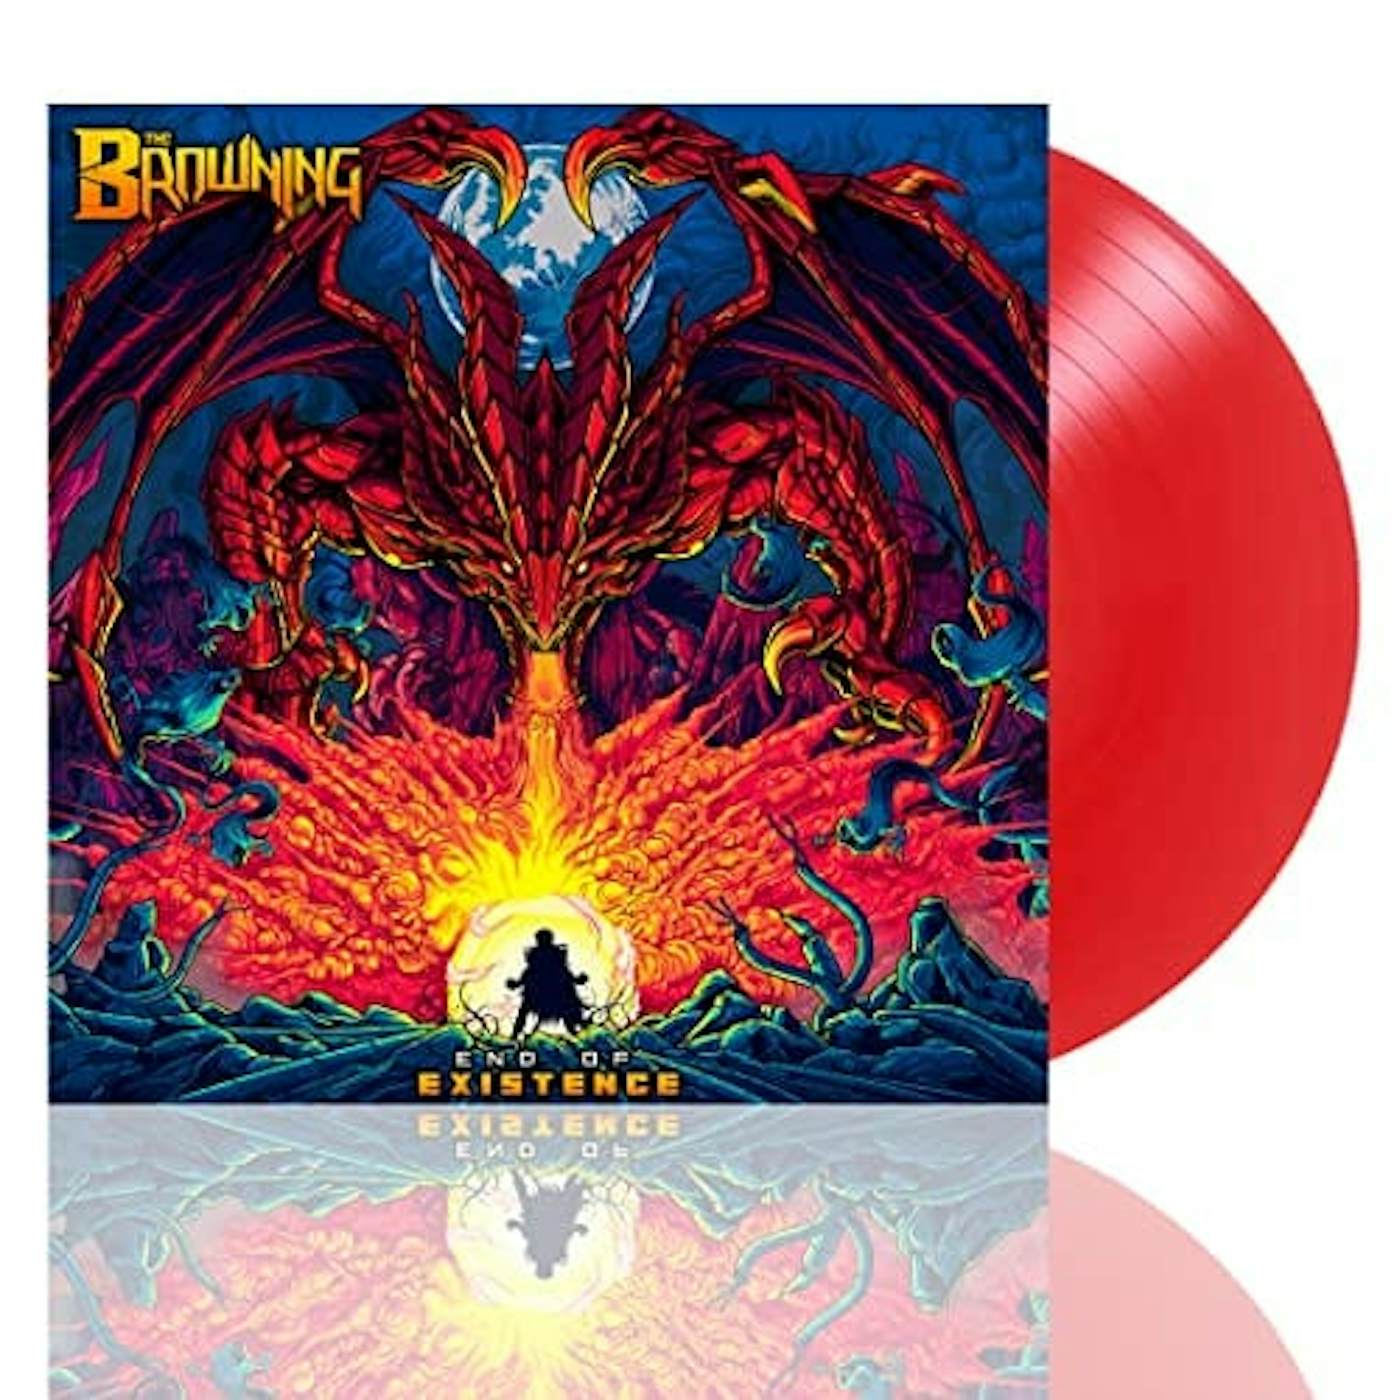 The Browning END OF EXISTENCE (RED VINYL) Vinyl Record